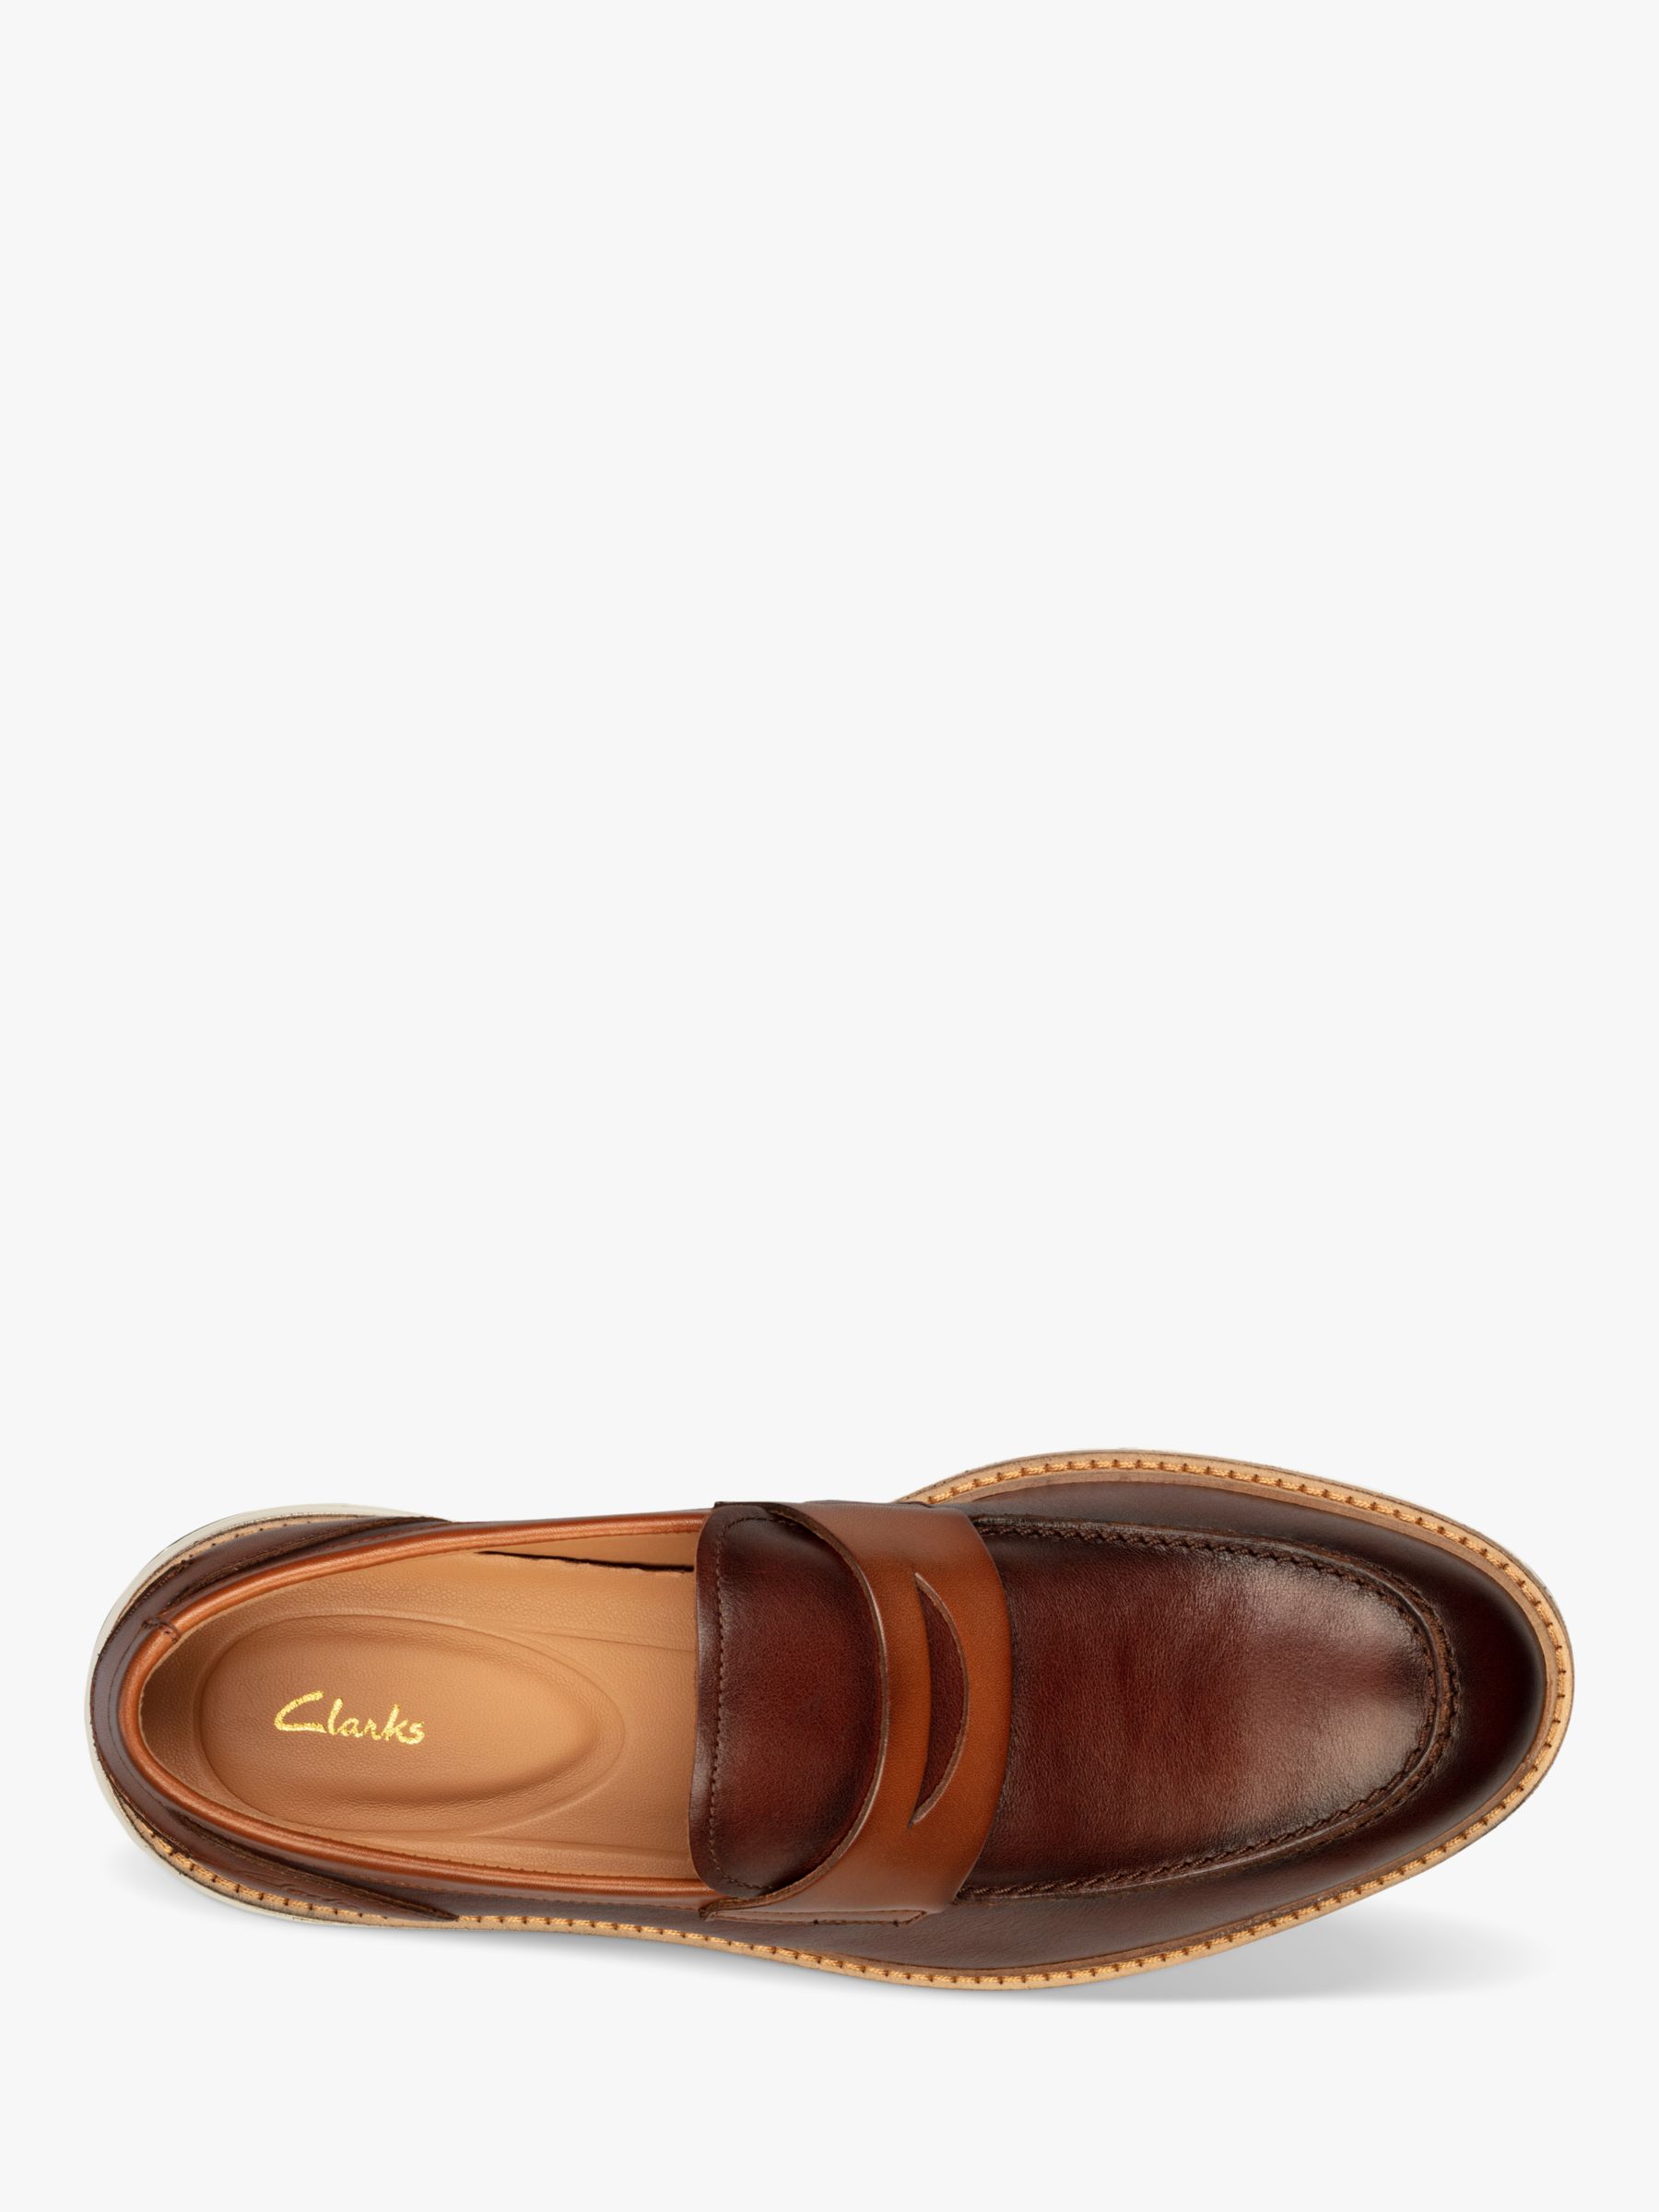 Clarks Chantry Leather Penny Loafers, Tan at John Lewis & Partners